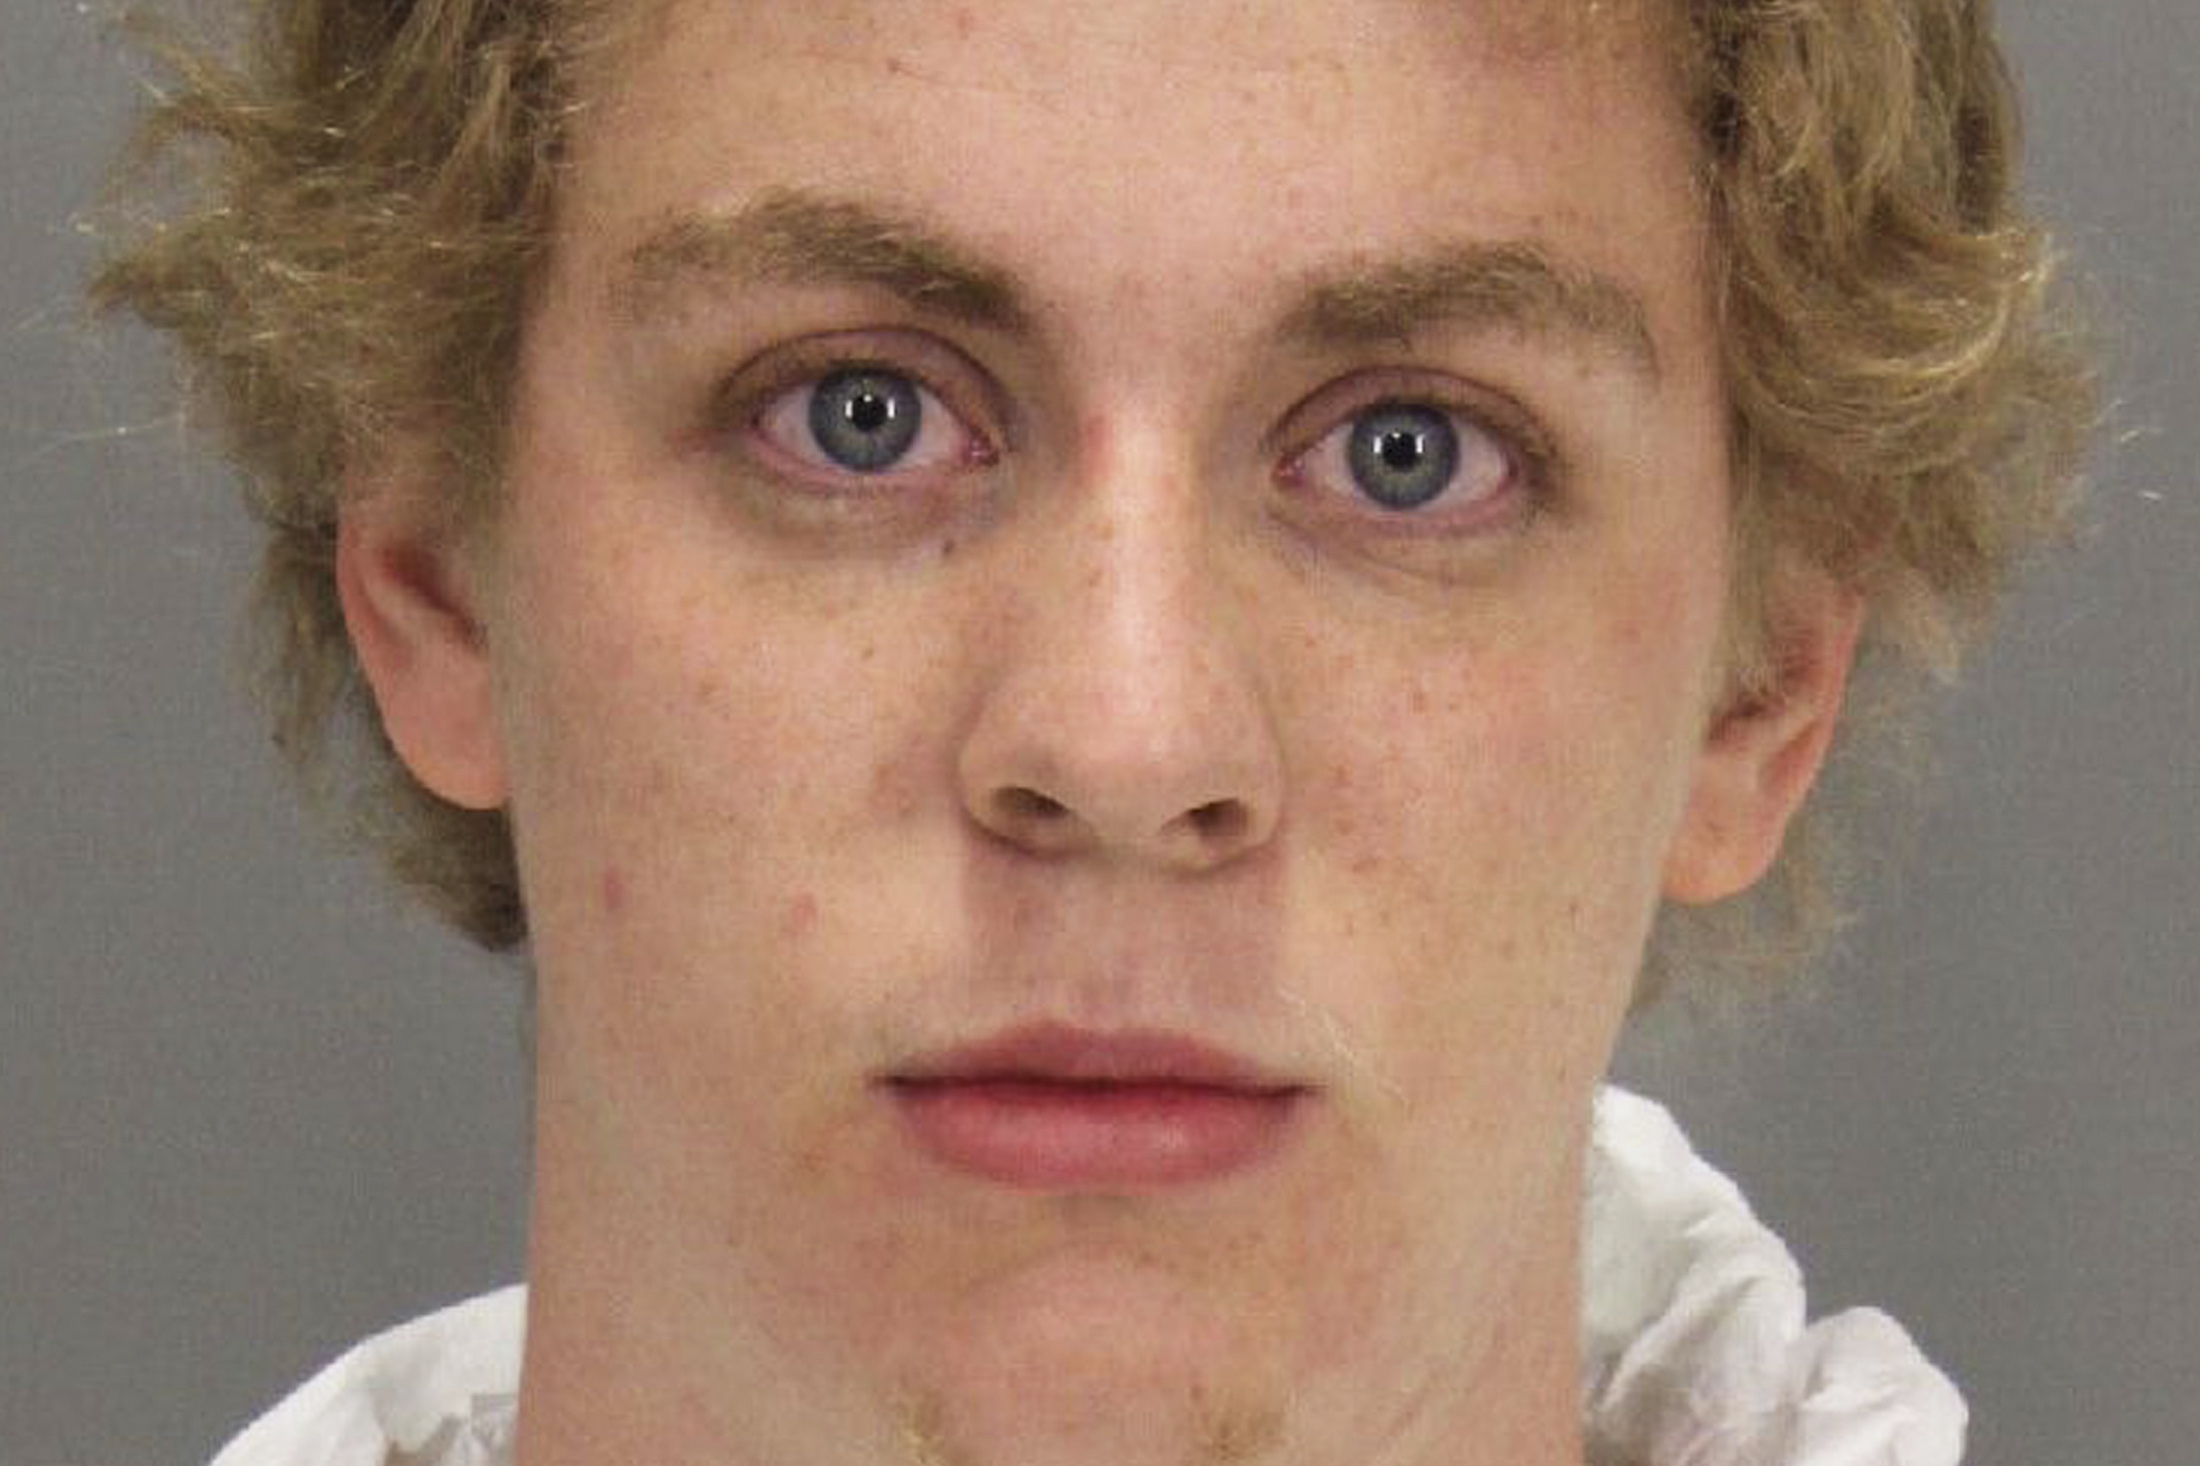 Brock Turner in his Jan. 2015 booking photo, released by the Santa Clara County Sheriff's Office. (Santa Clara County Sheriff's Office/AP)